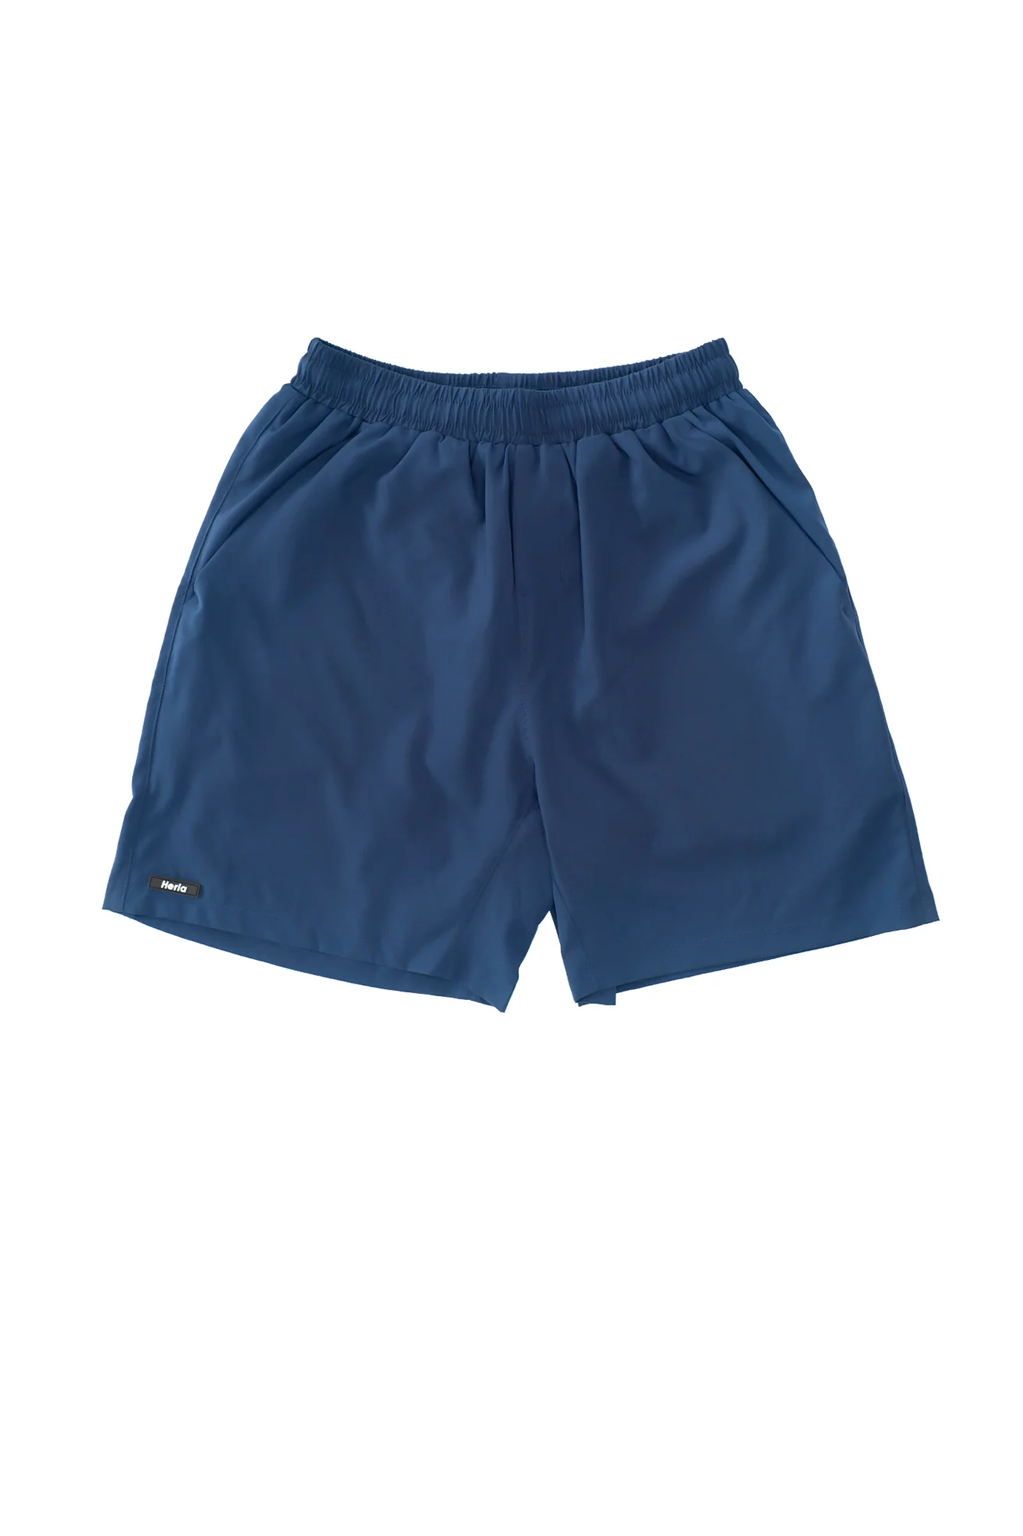 Heria Shorts - Solid Blue